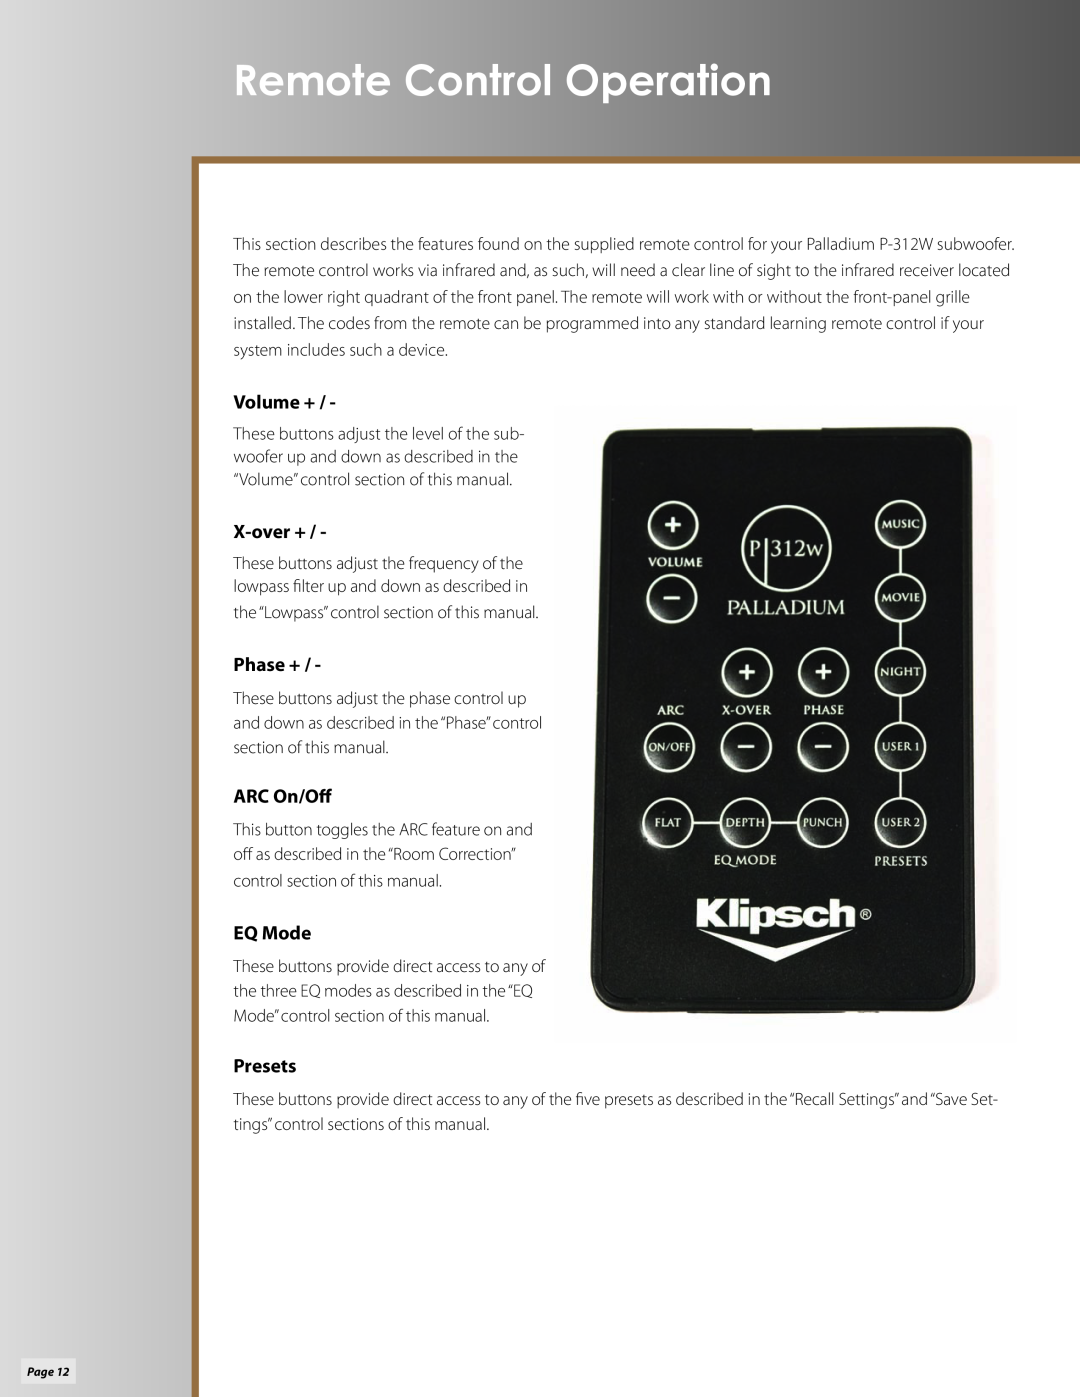 Klipsch P-312W owner manual Remote Control Operation, Volume +, X-over+, Phase +, ARC On/Off, Presets, EQ Mode 